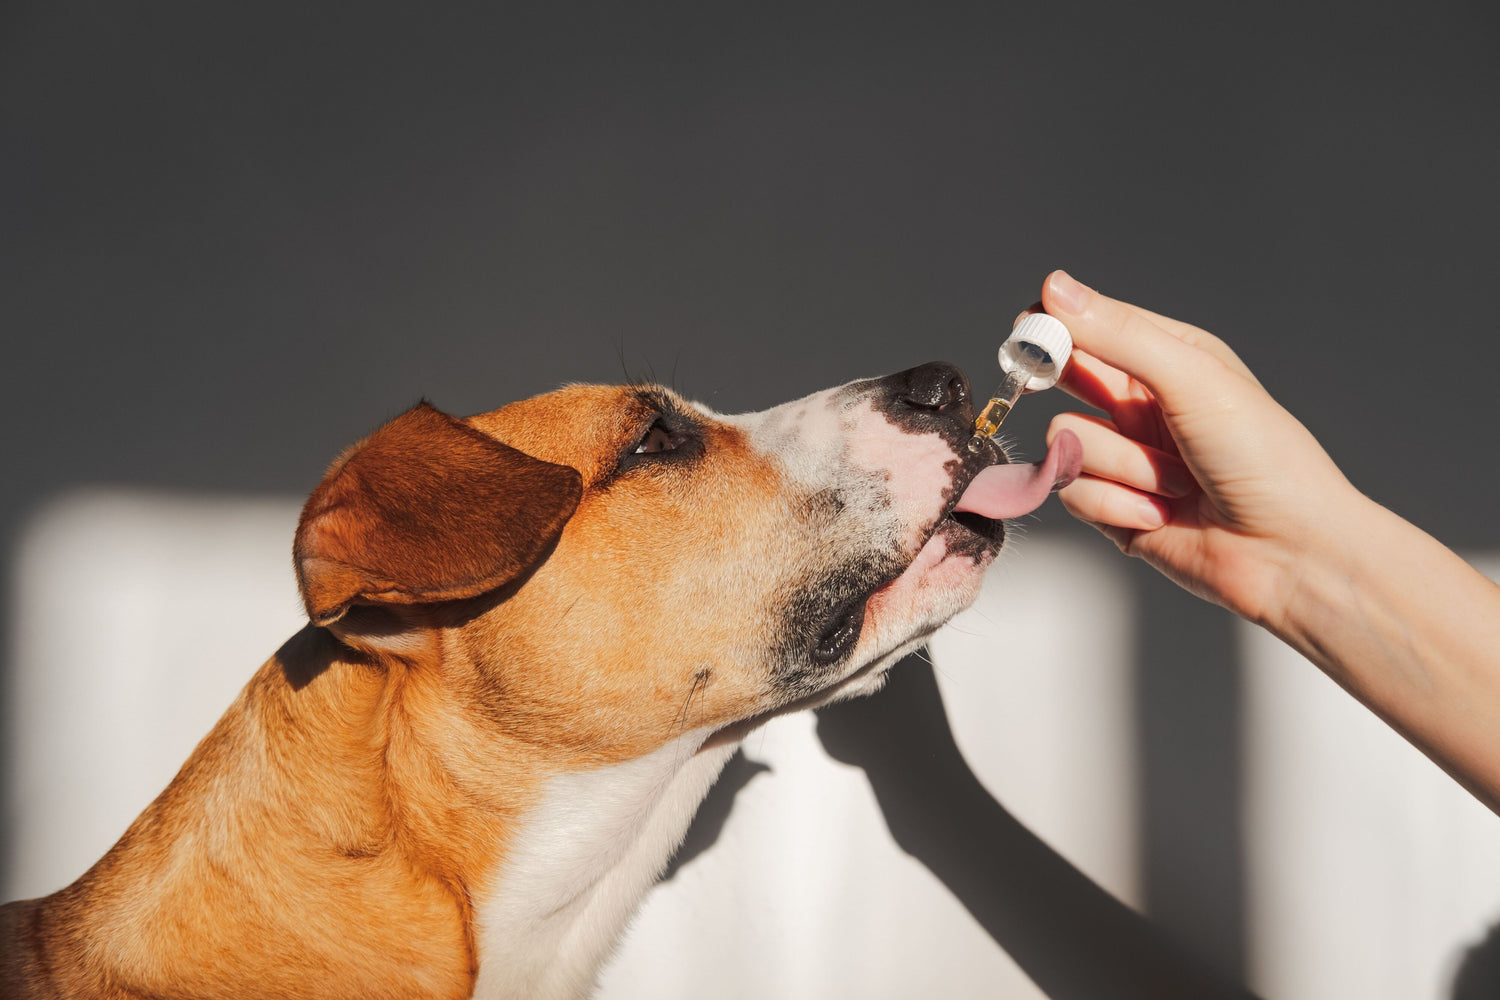 Consumer interest in pet CBD products expected to continue growing, study says